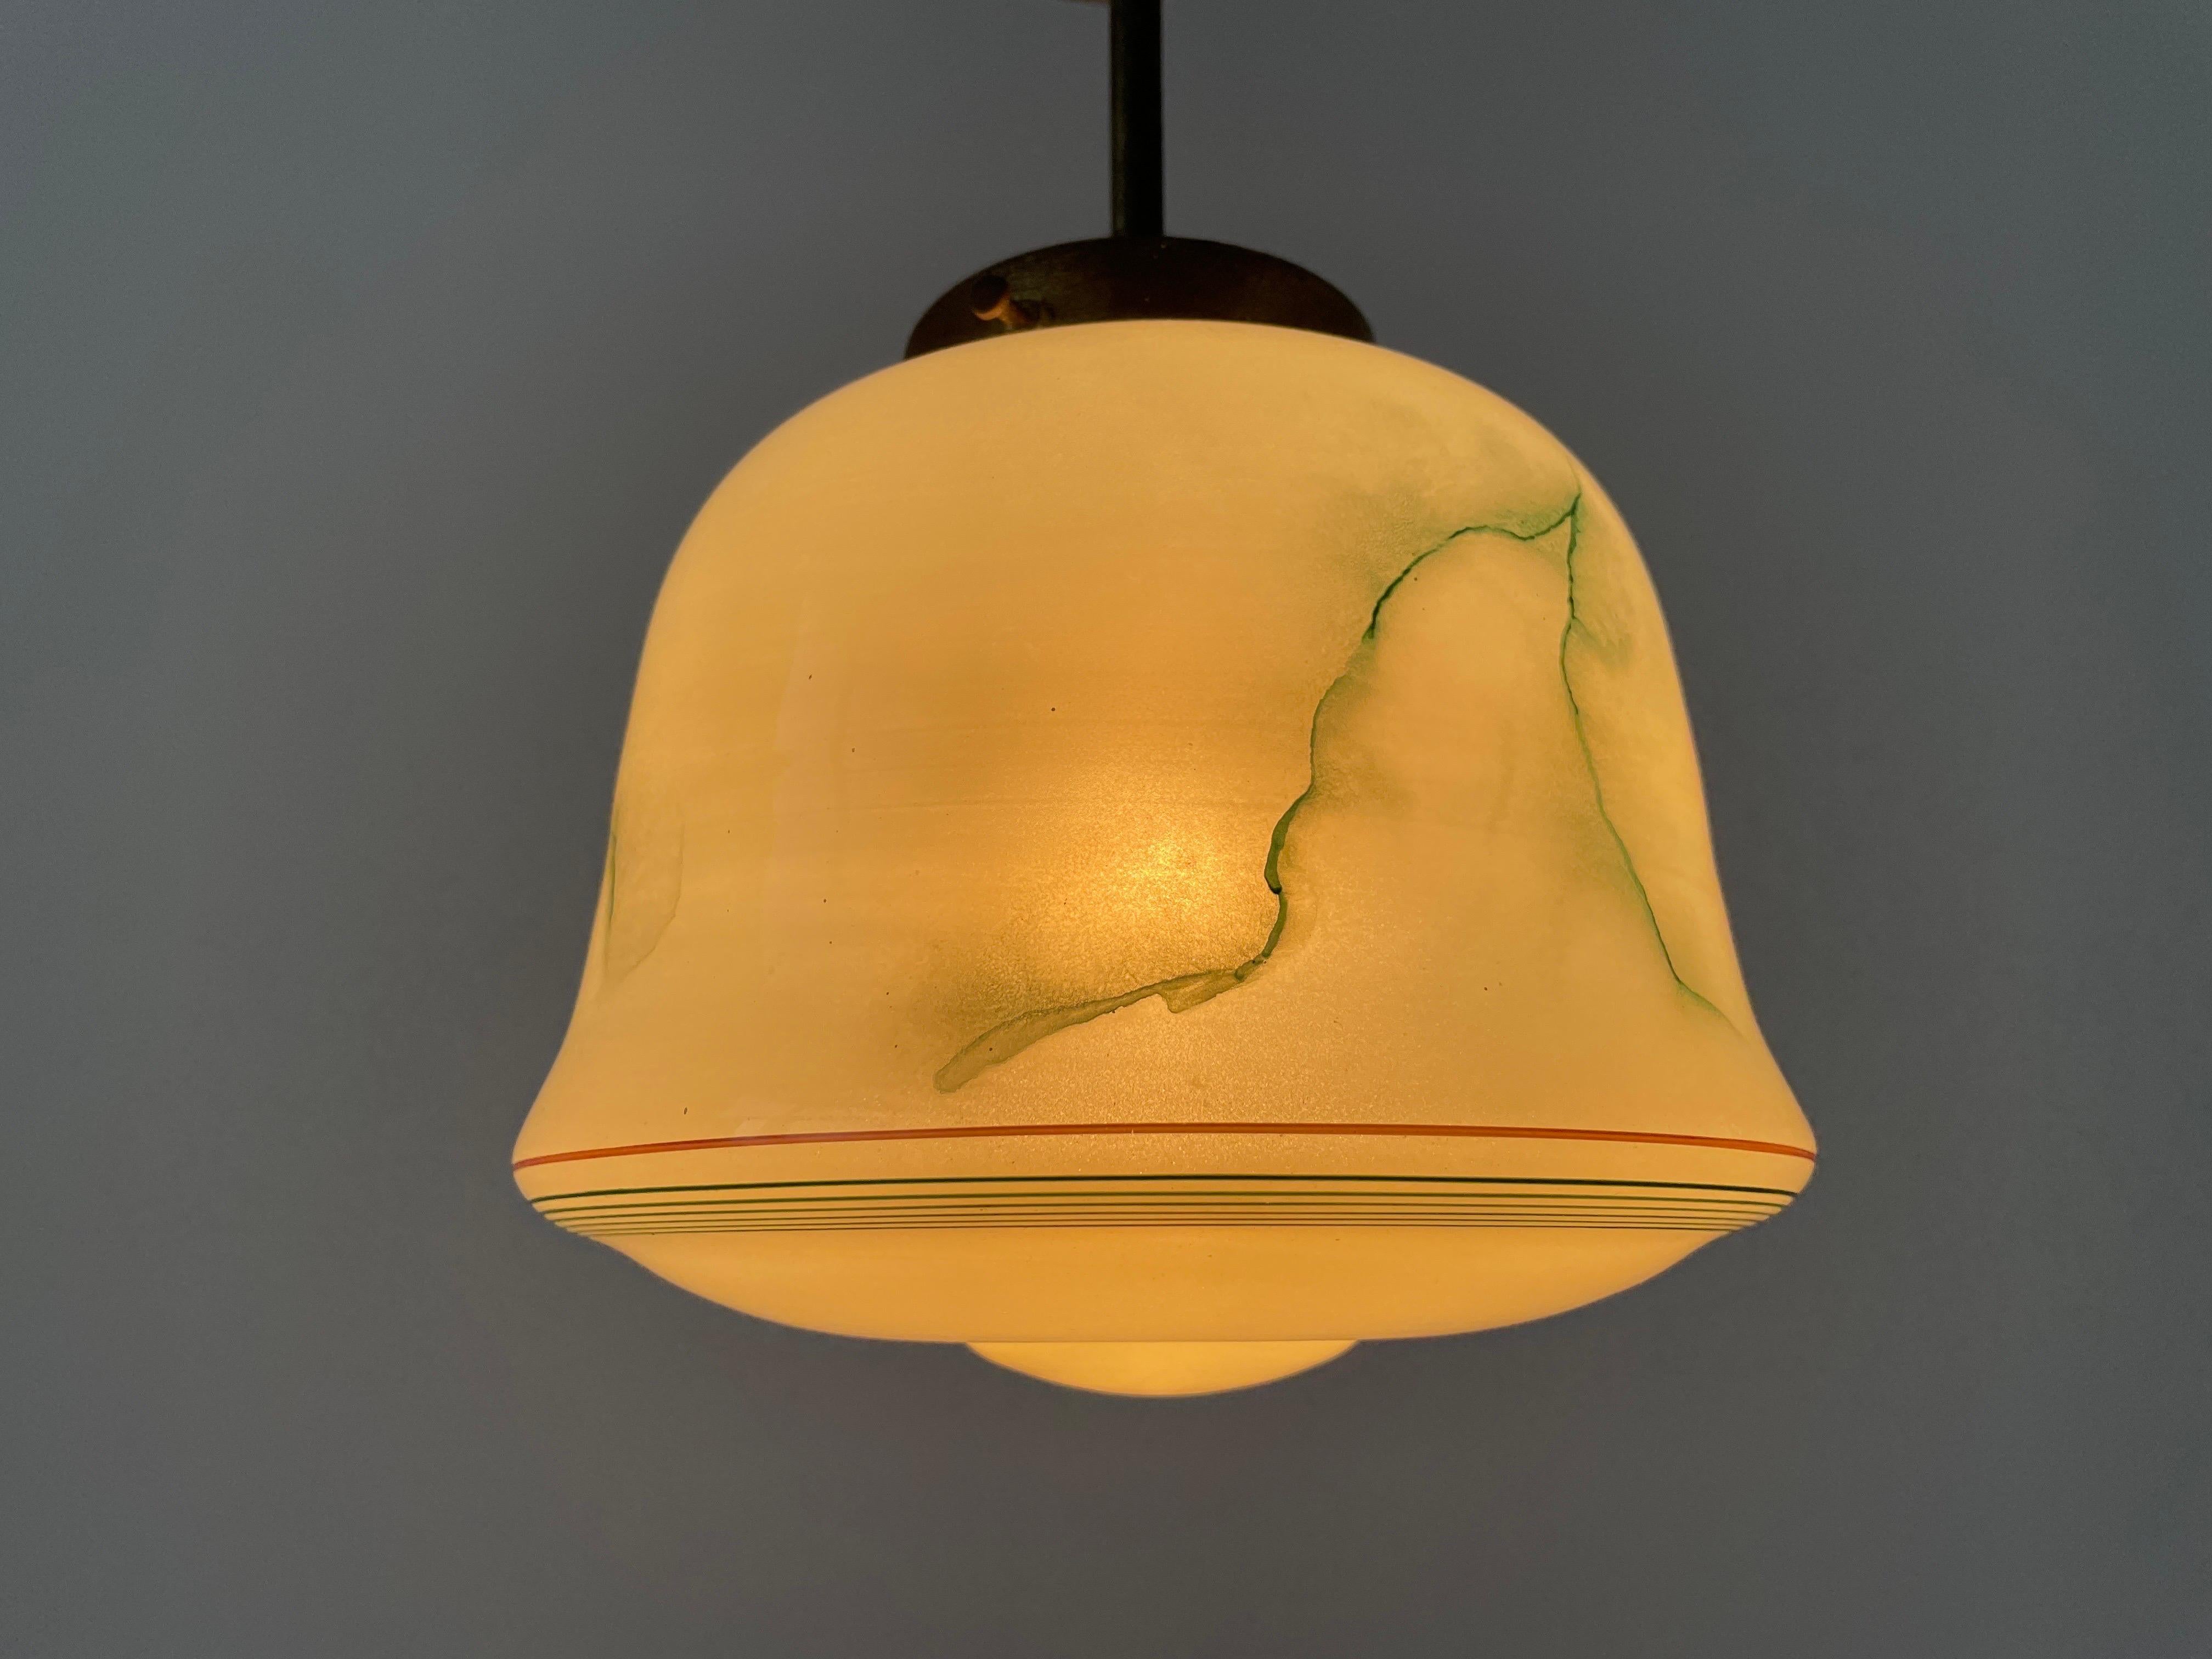 Green Glass Art Deco Small Ceiling Lamp, 1950s, Germany For Sale 2